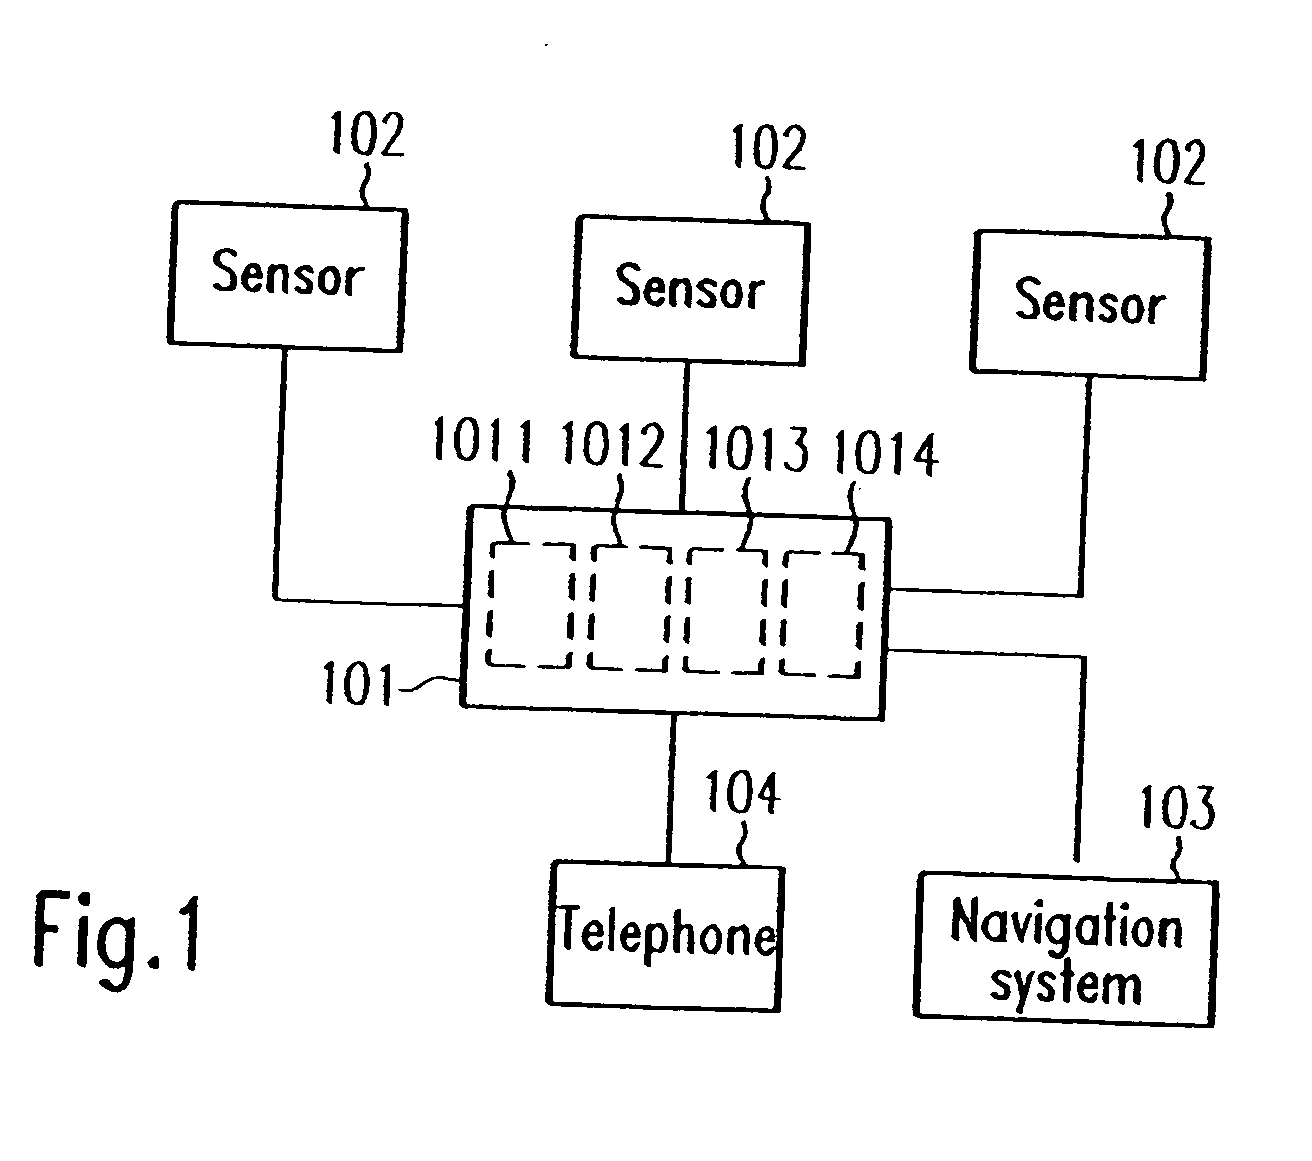 System for determining weather information and providing ambient parameter data